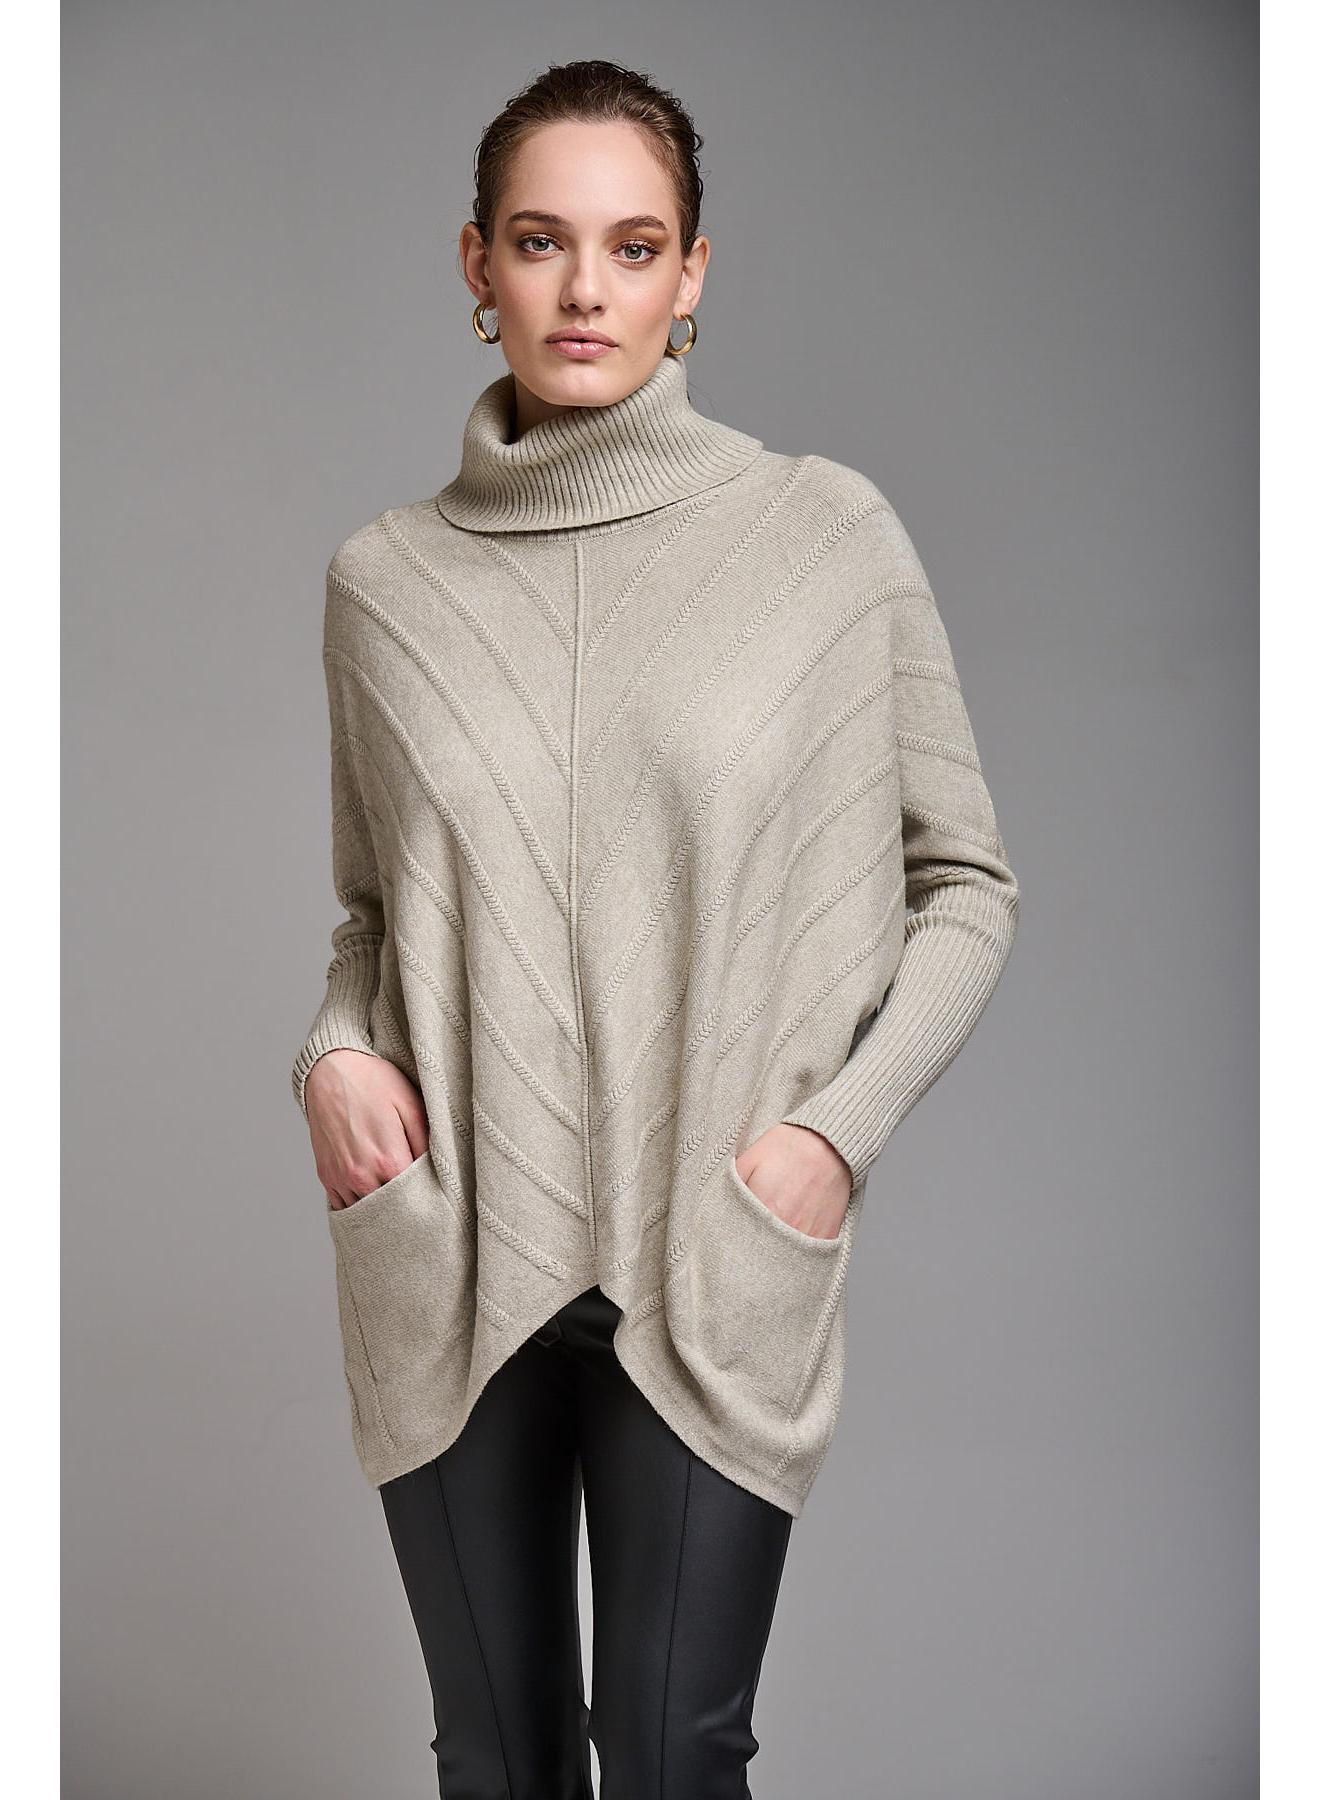 Oversized turtleneck sweater with textured details and pockets - 3